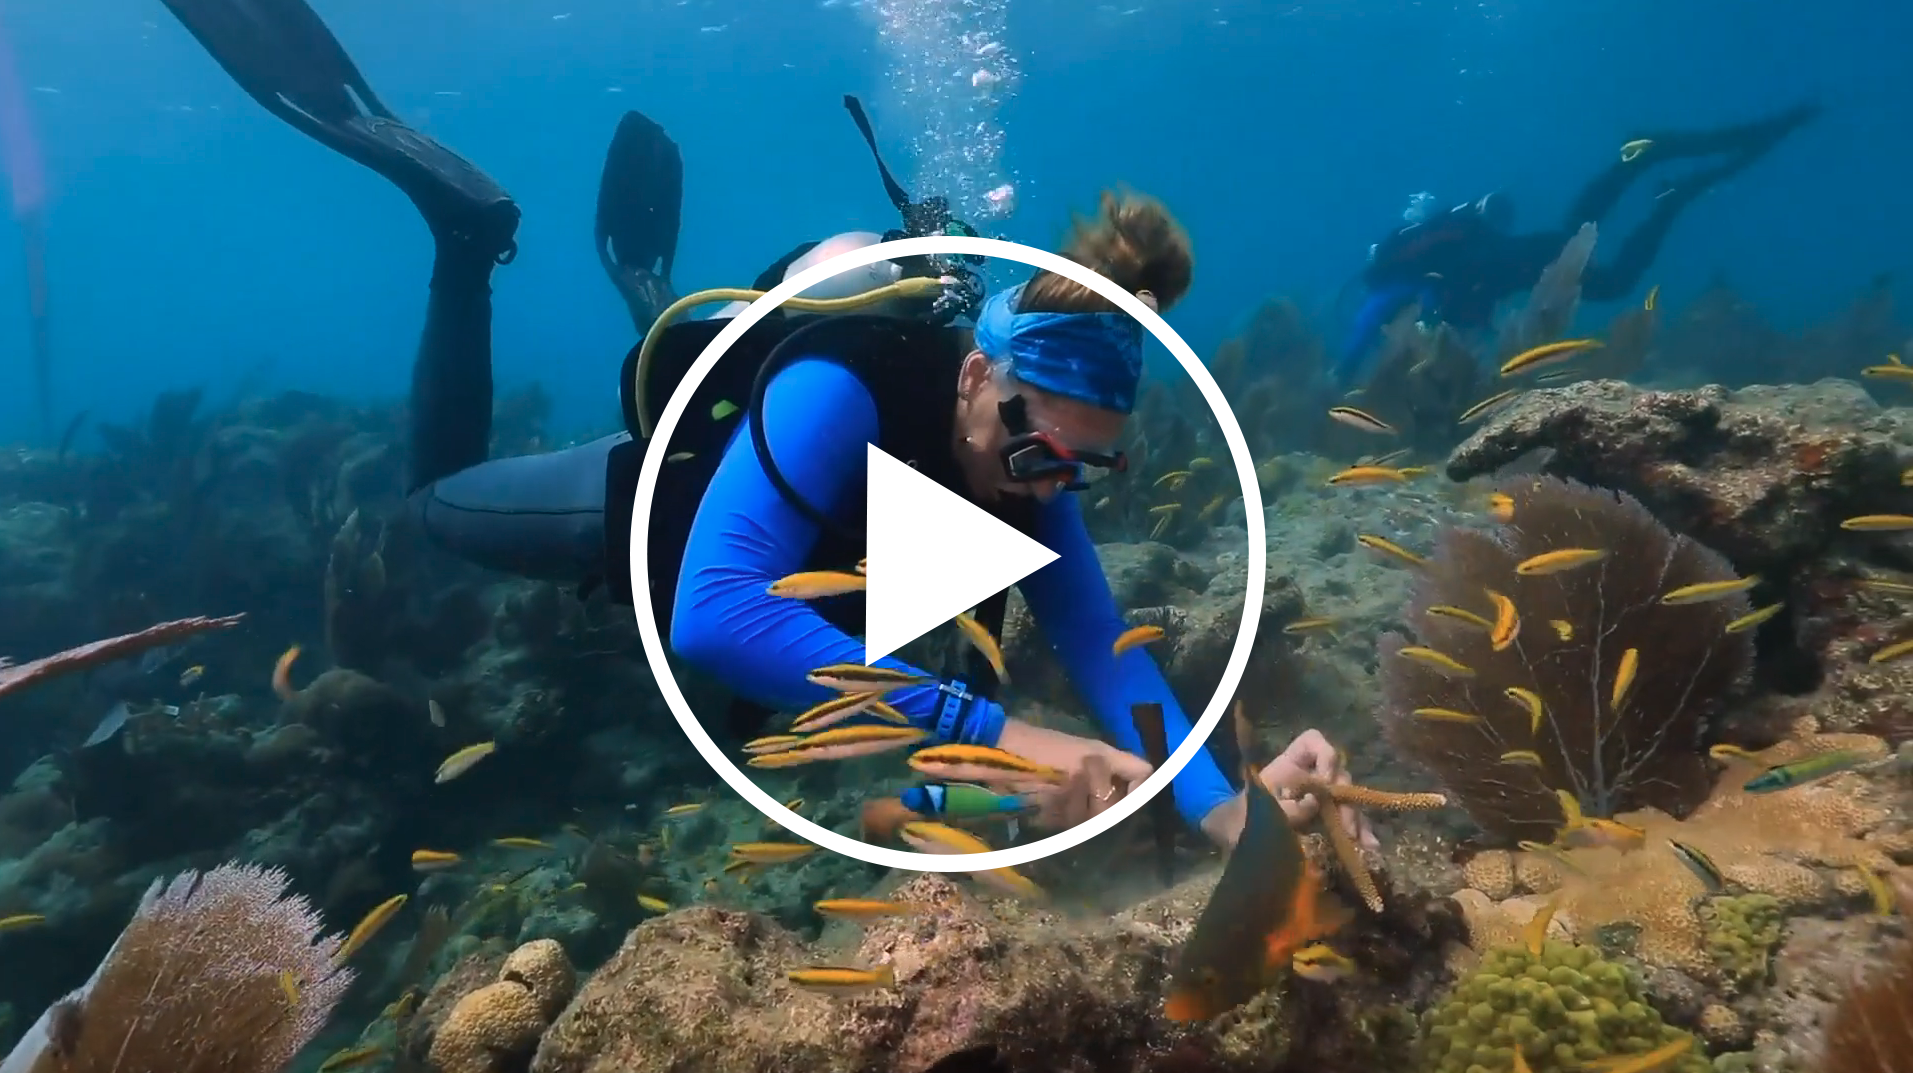 [VIDEO] What's happening to our coral reefs?